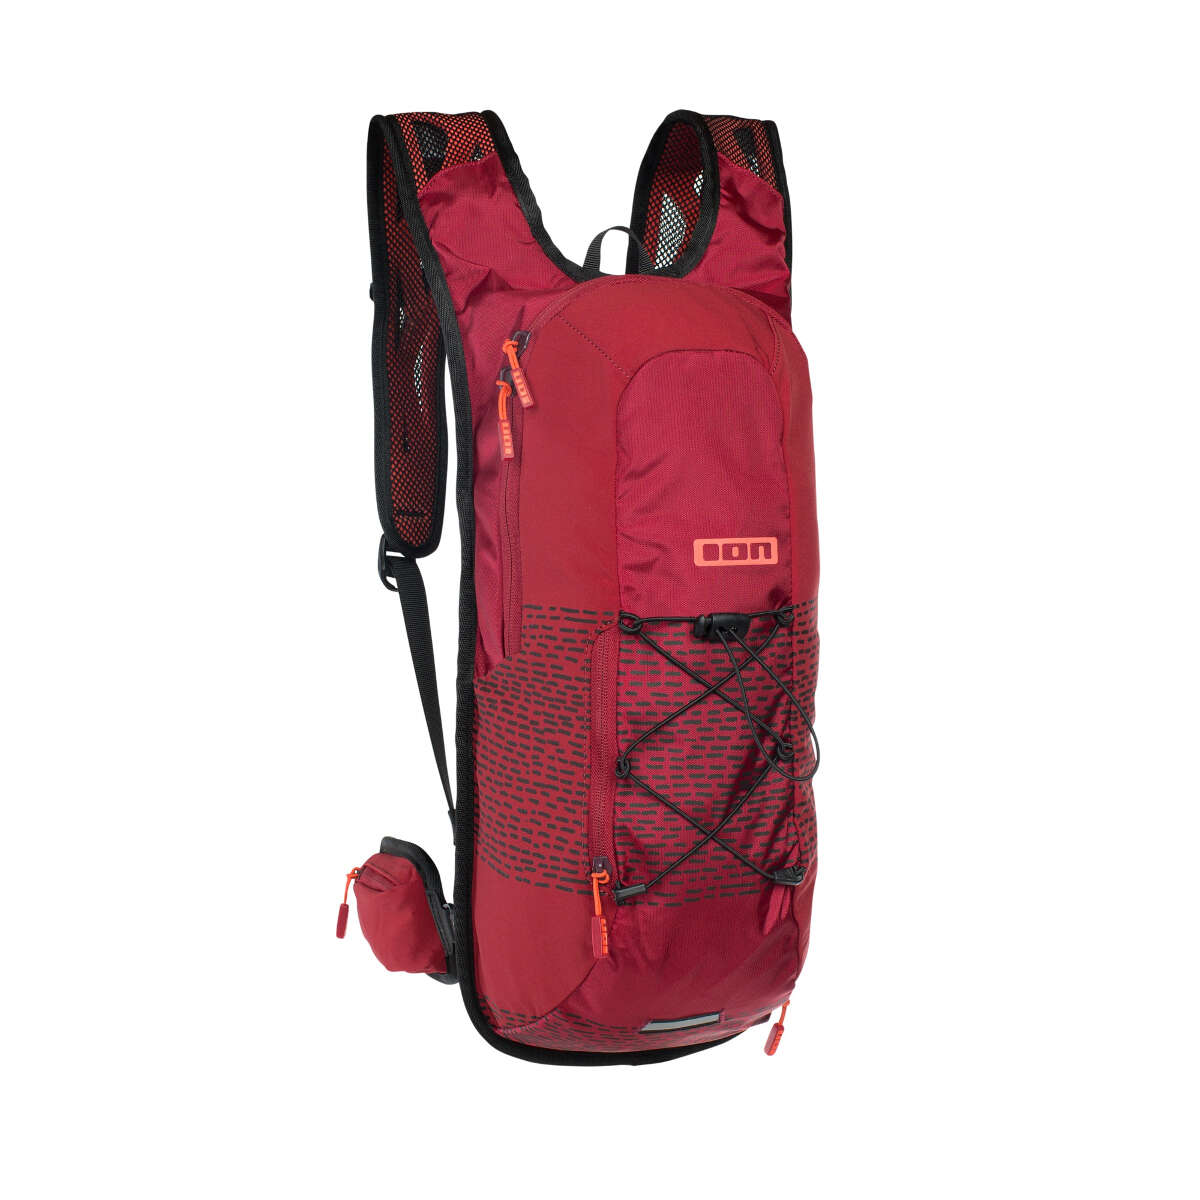 ION Backpack with Hydration System Villain 8 Ruby Rad - 8 L